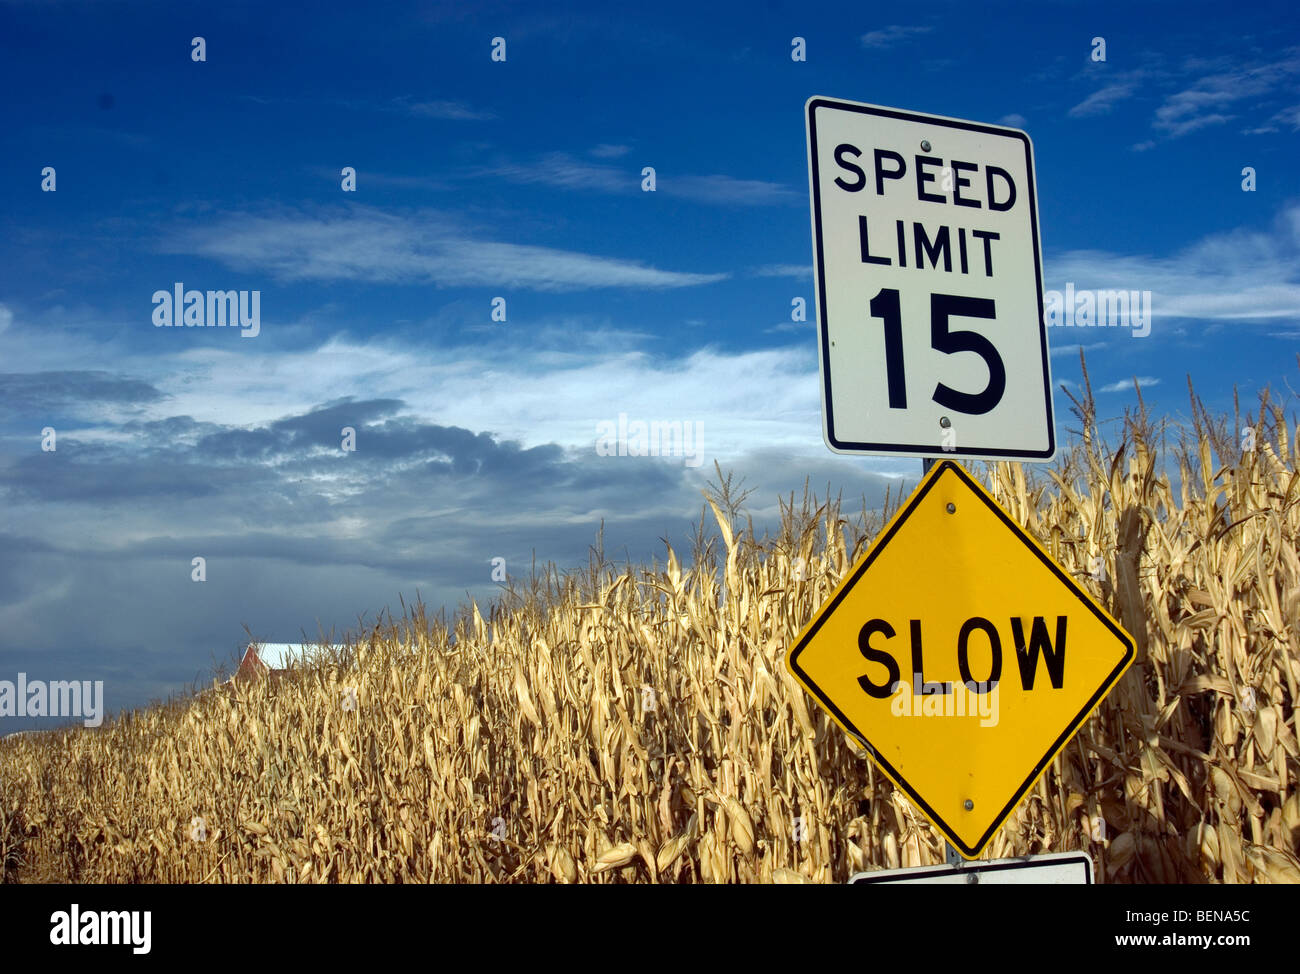 Corn rows growing on rural farm behind speed limit sign Stock Photo